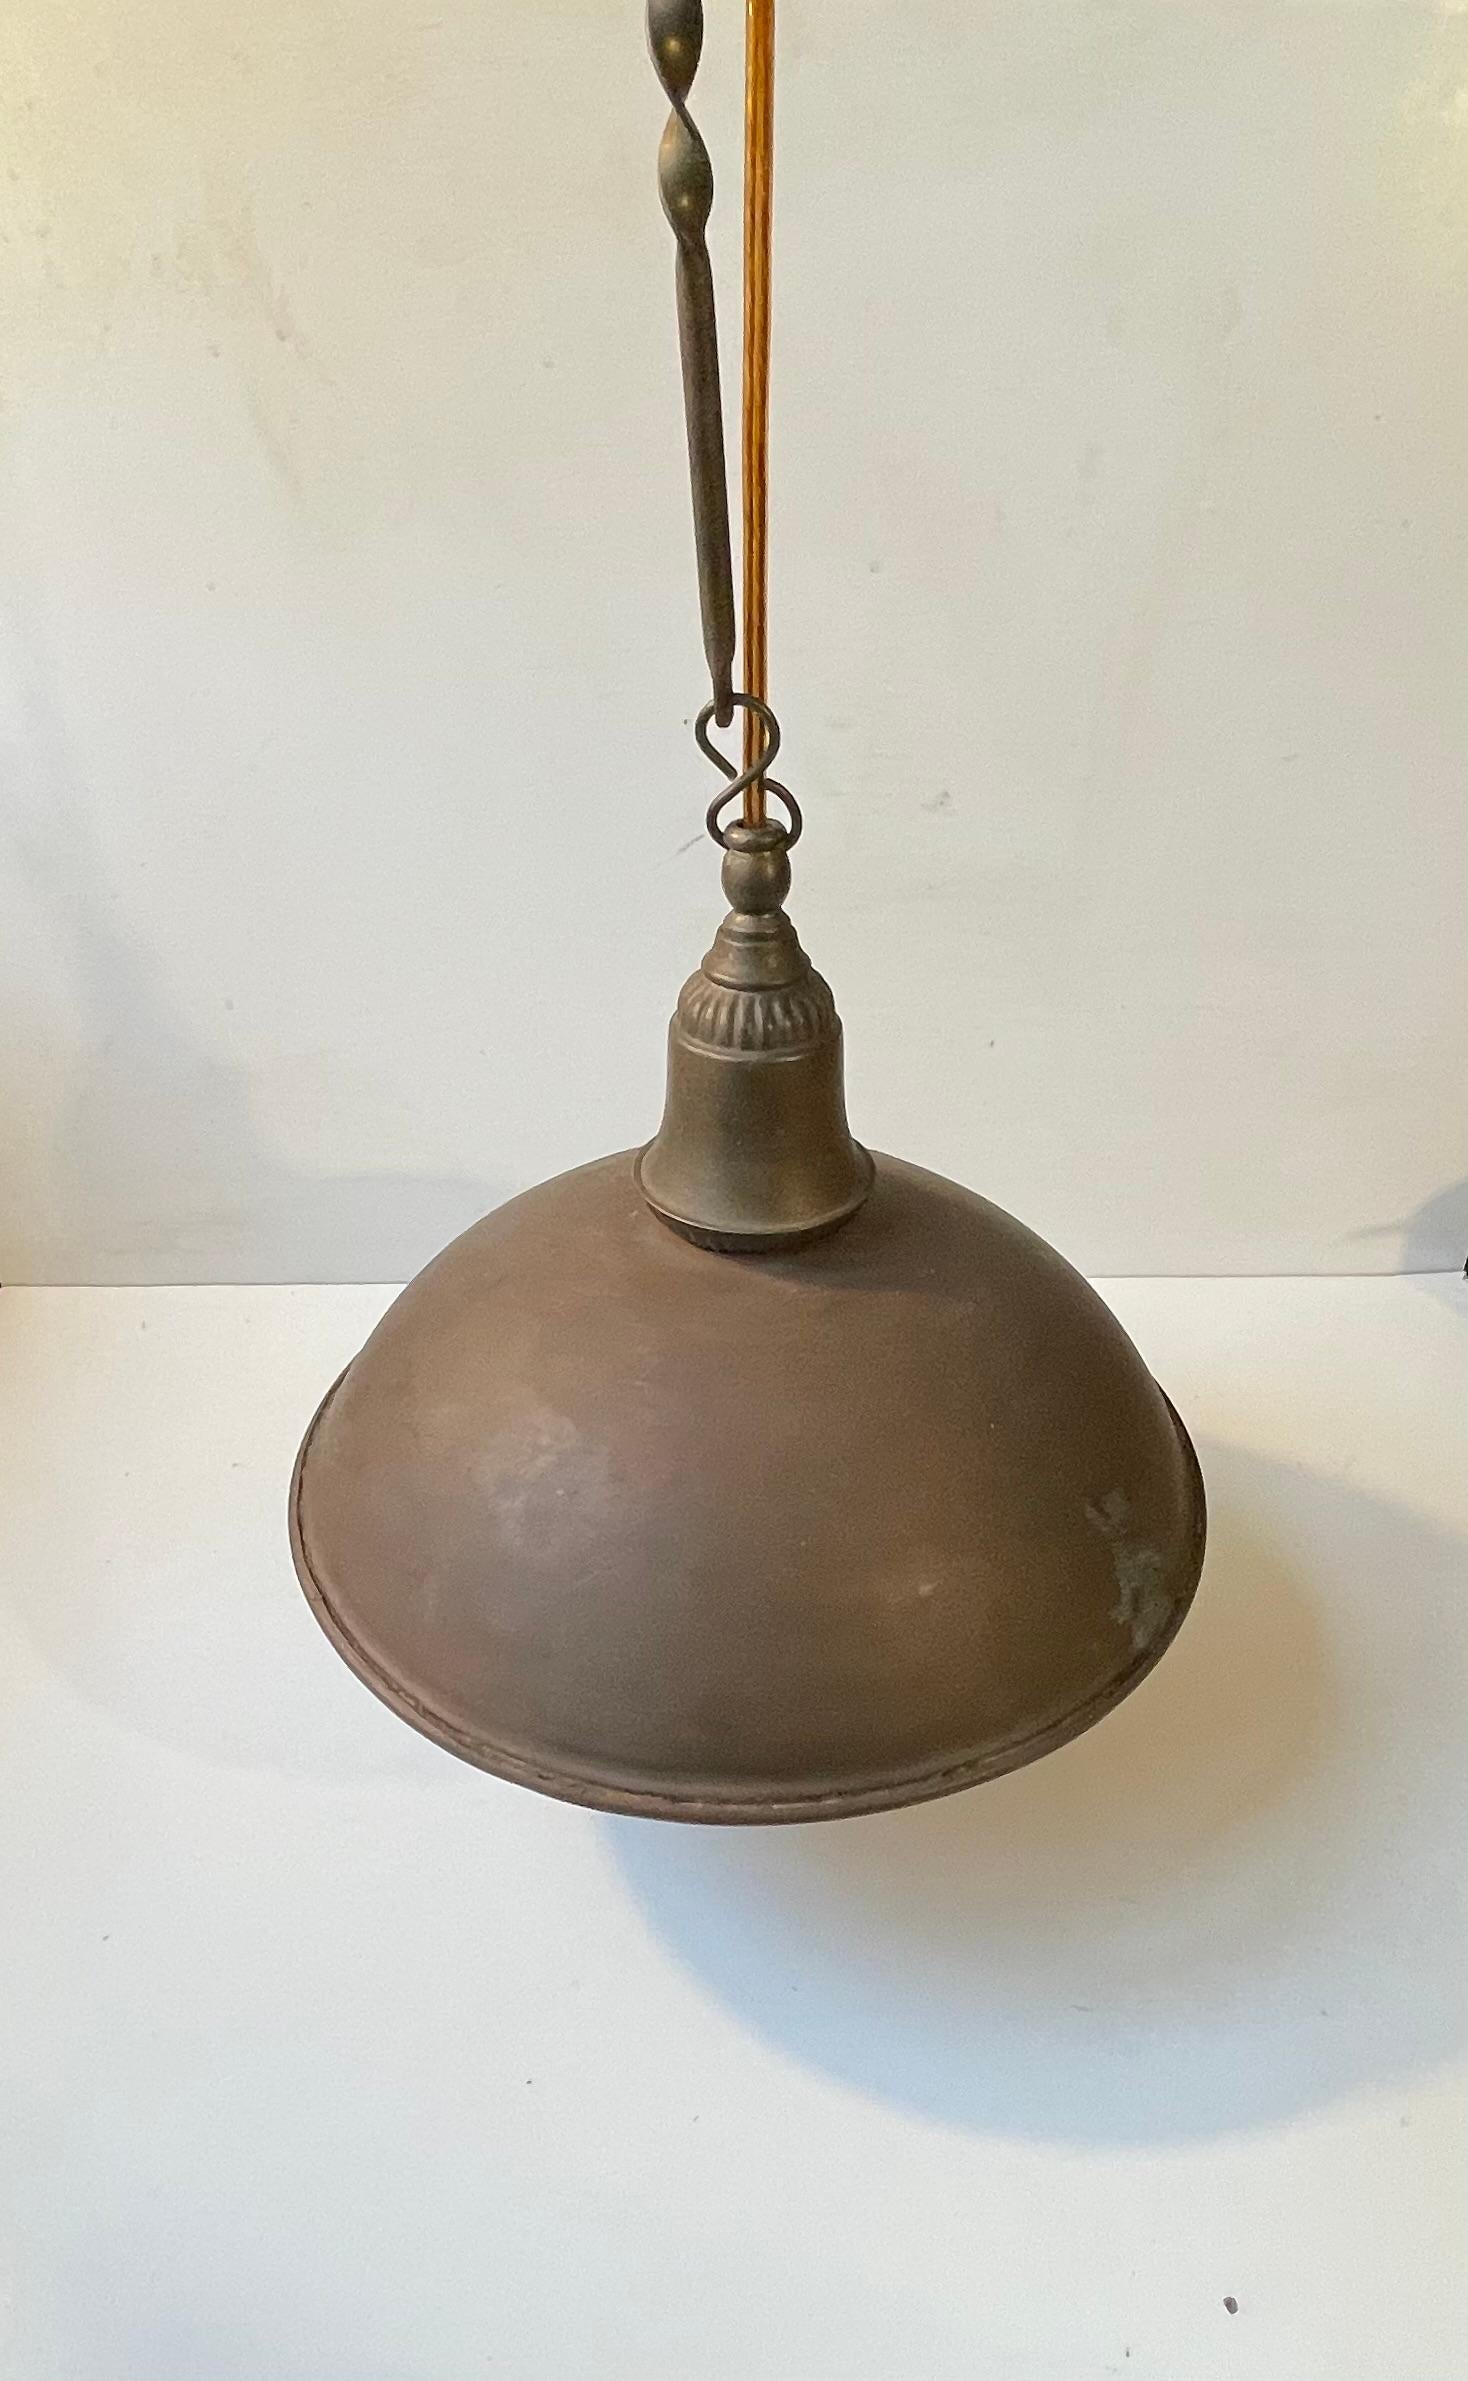 Nautical Chain Suspended Hanging Lamp in Brass and Copper, 1930s For Sale 1